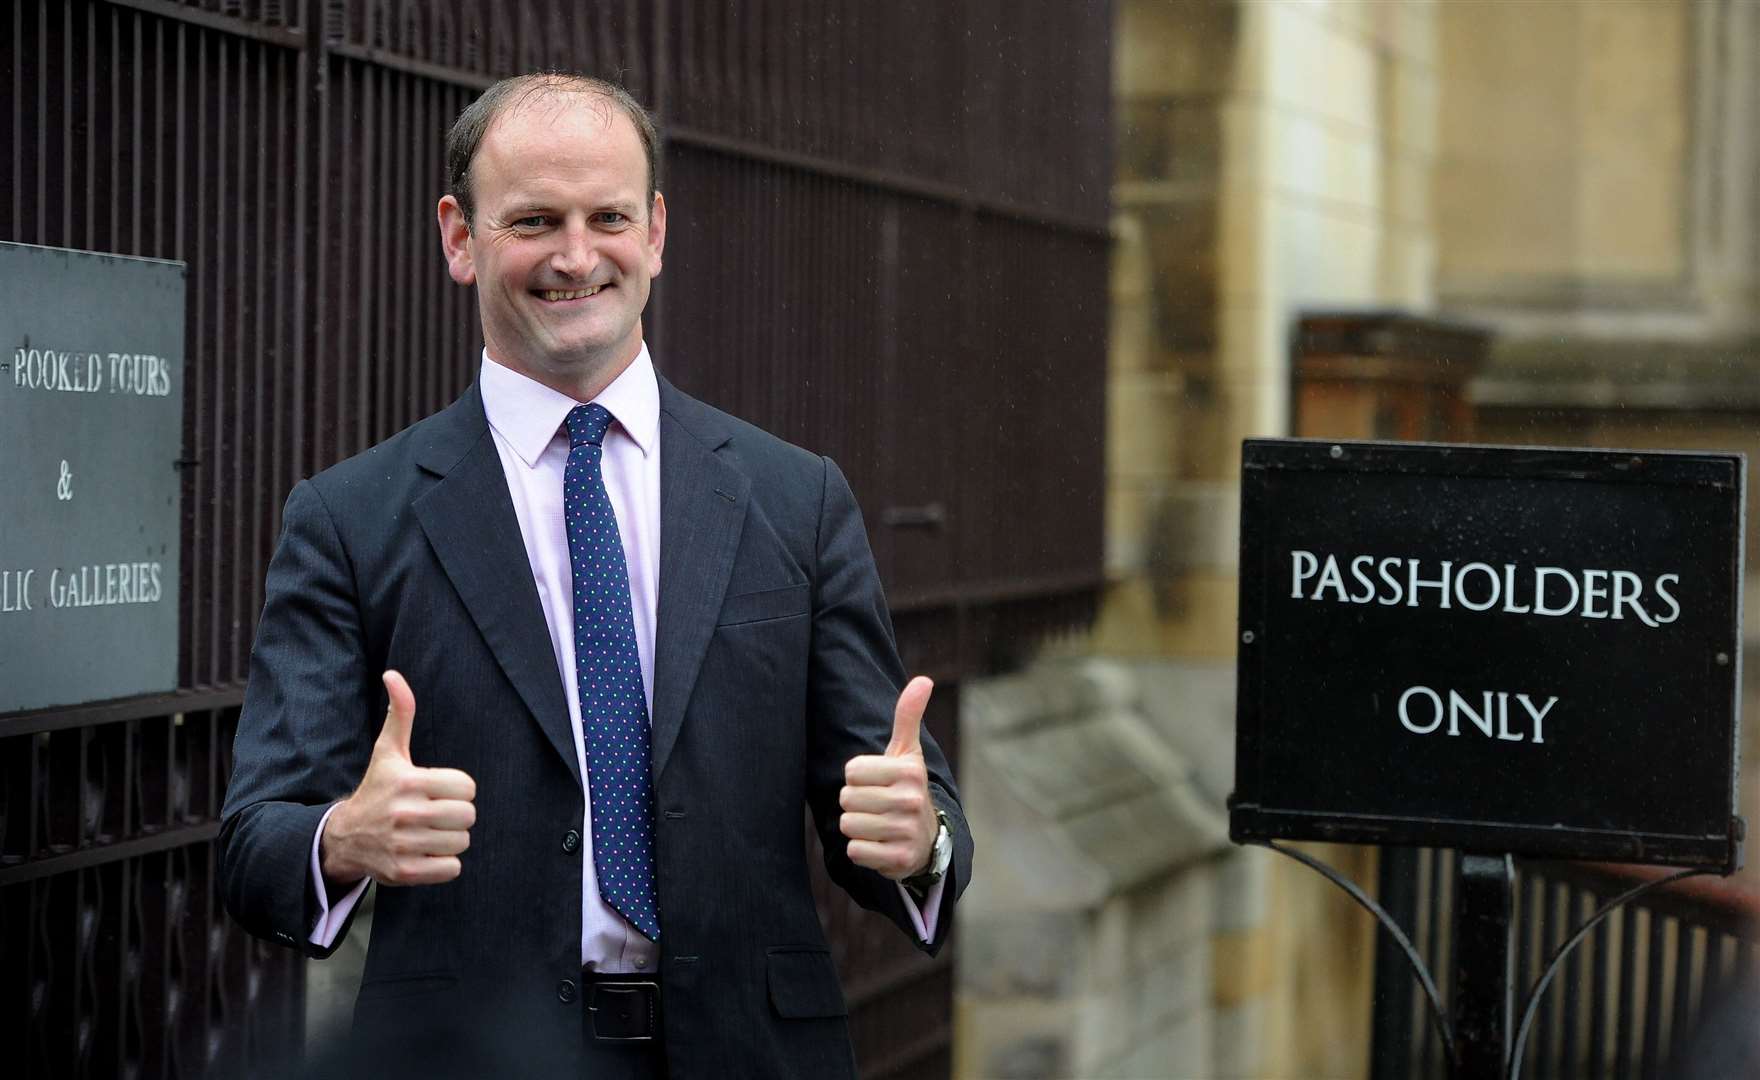 Former Tory Douglas Carswell decided to trigger a by-election after his defection to Ukip in 2014, providing the Eurosceptic party with a demonstration of its strength and its first directly elected MP (Andrew Matthews/PA)